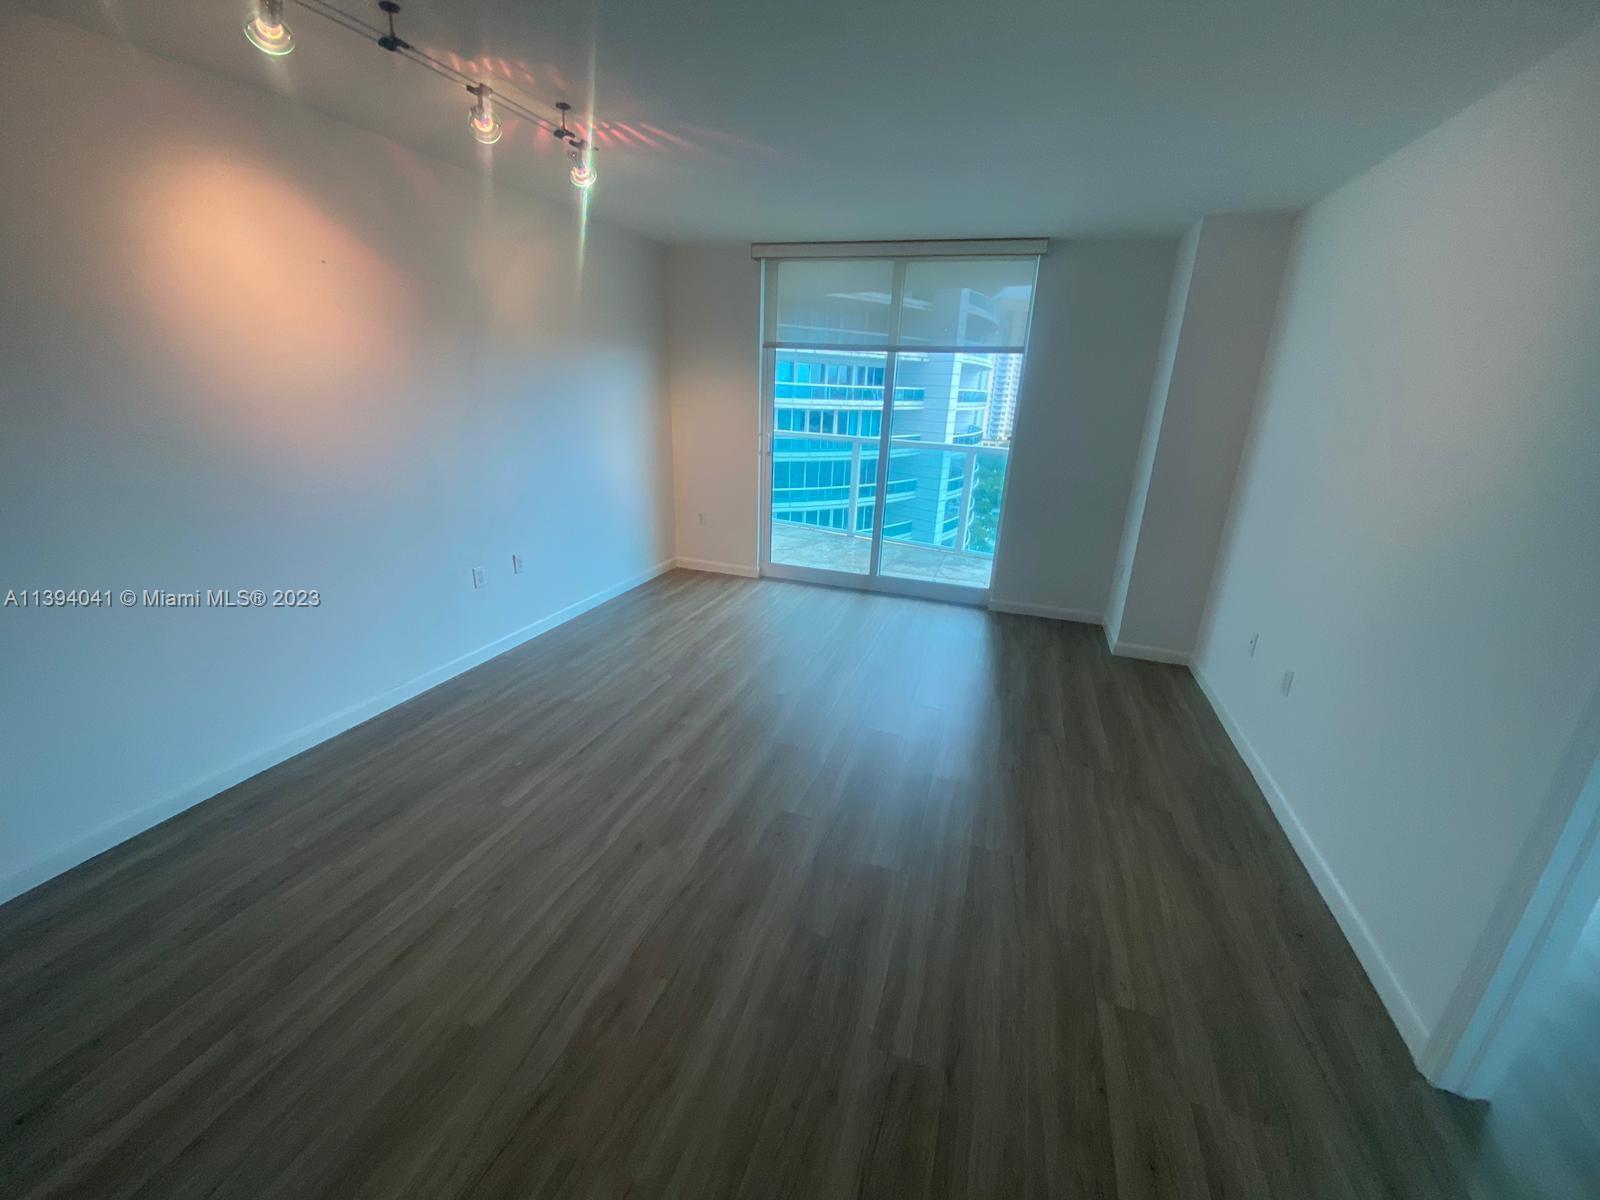 NEW WOOD FLOORING. BEAUTIFUL ONE-BEDROOM, ONE-BATHROOM CONVENIENTLY LOCATED IN THE MIAMI BRICKELL AR